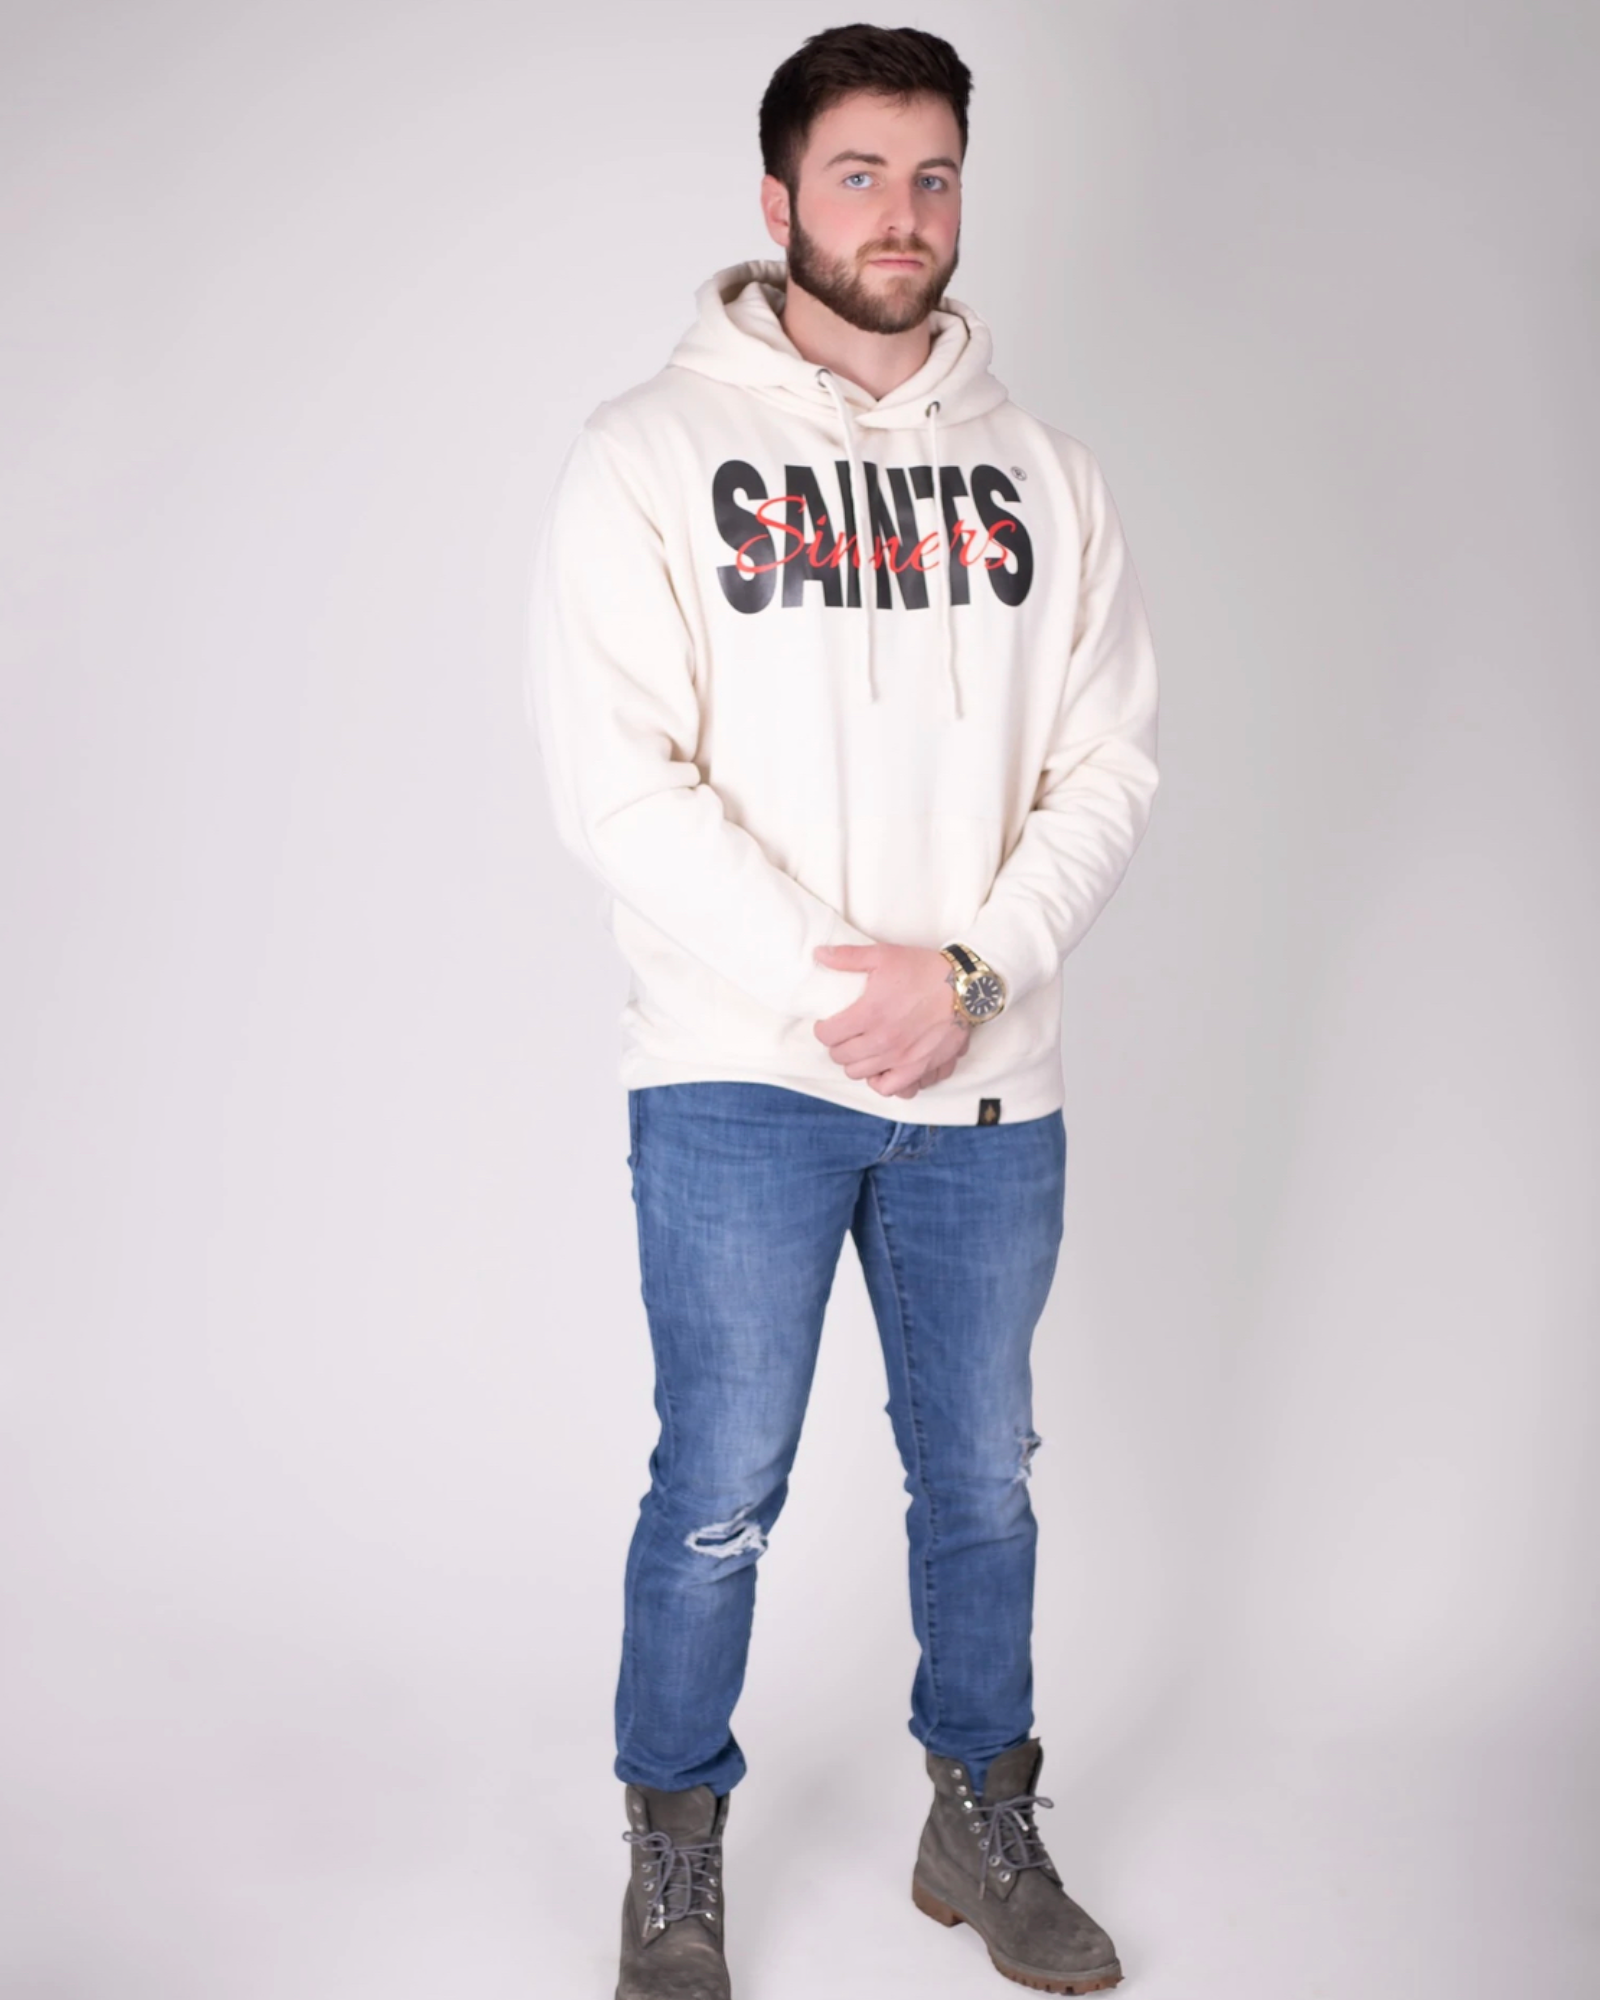 Signed Across Hoodie (Men, Women) - Tan/Cream/Offwhite **Restocked in Limited availability** - TheSinners2Saints